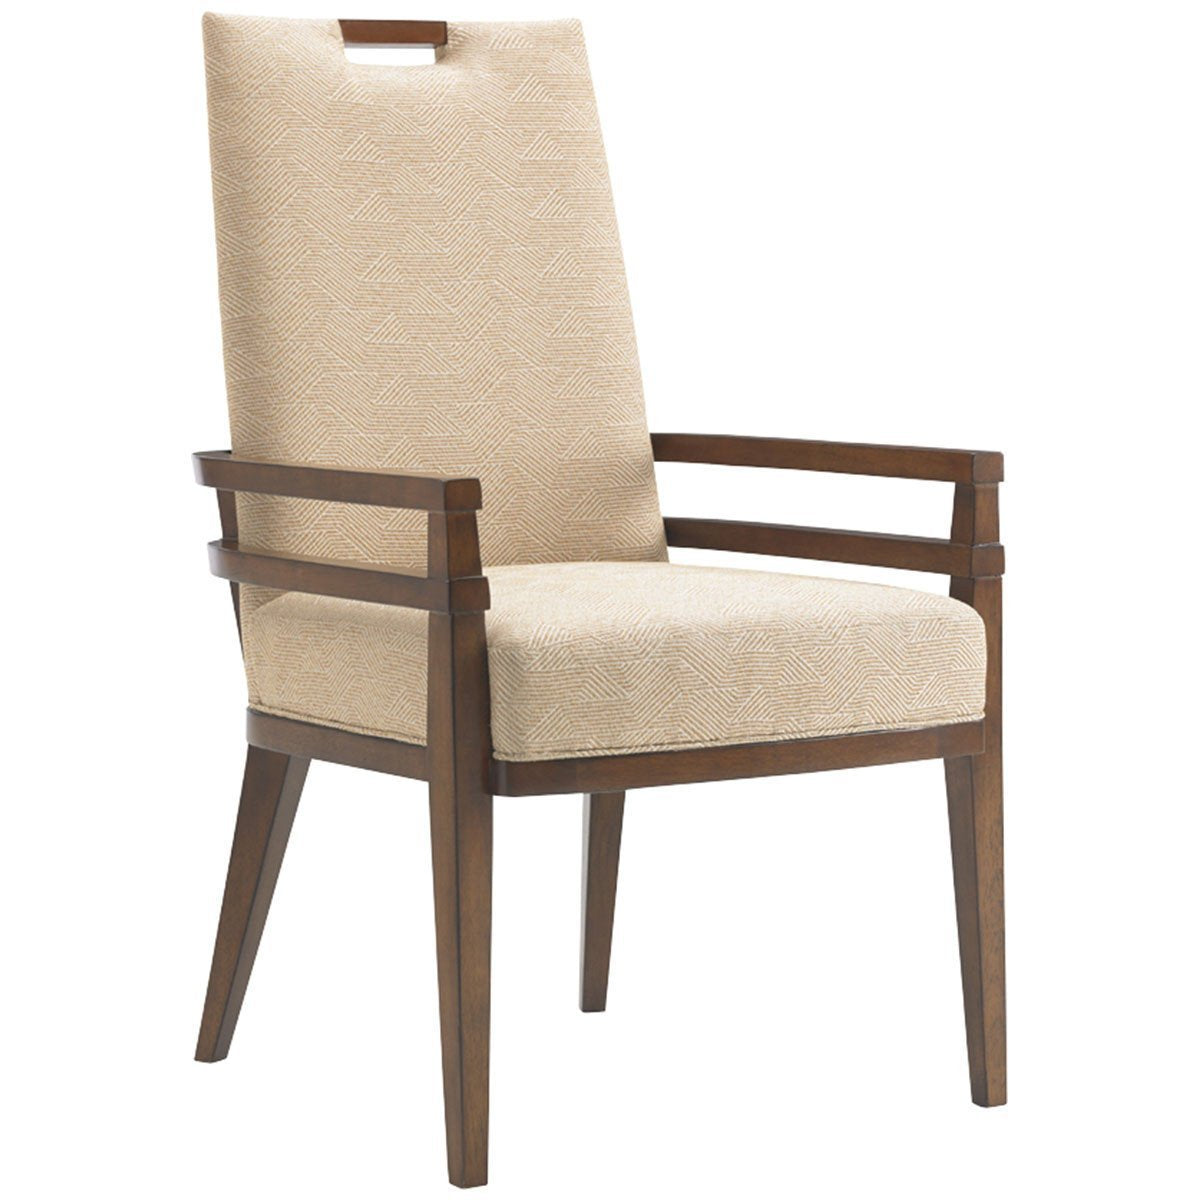 Tommy Bahama Island Fusion Coles Bay Arm Chair